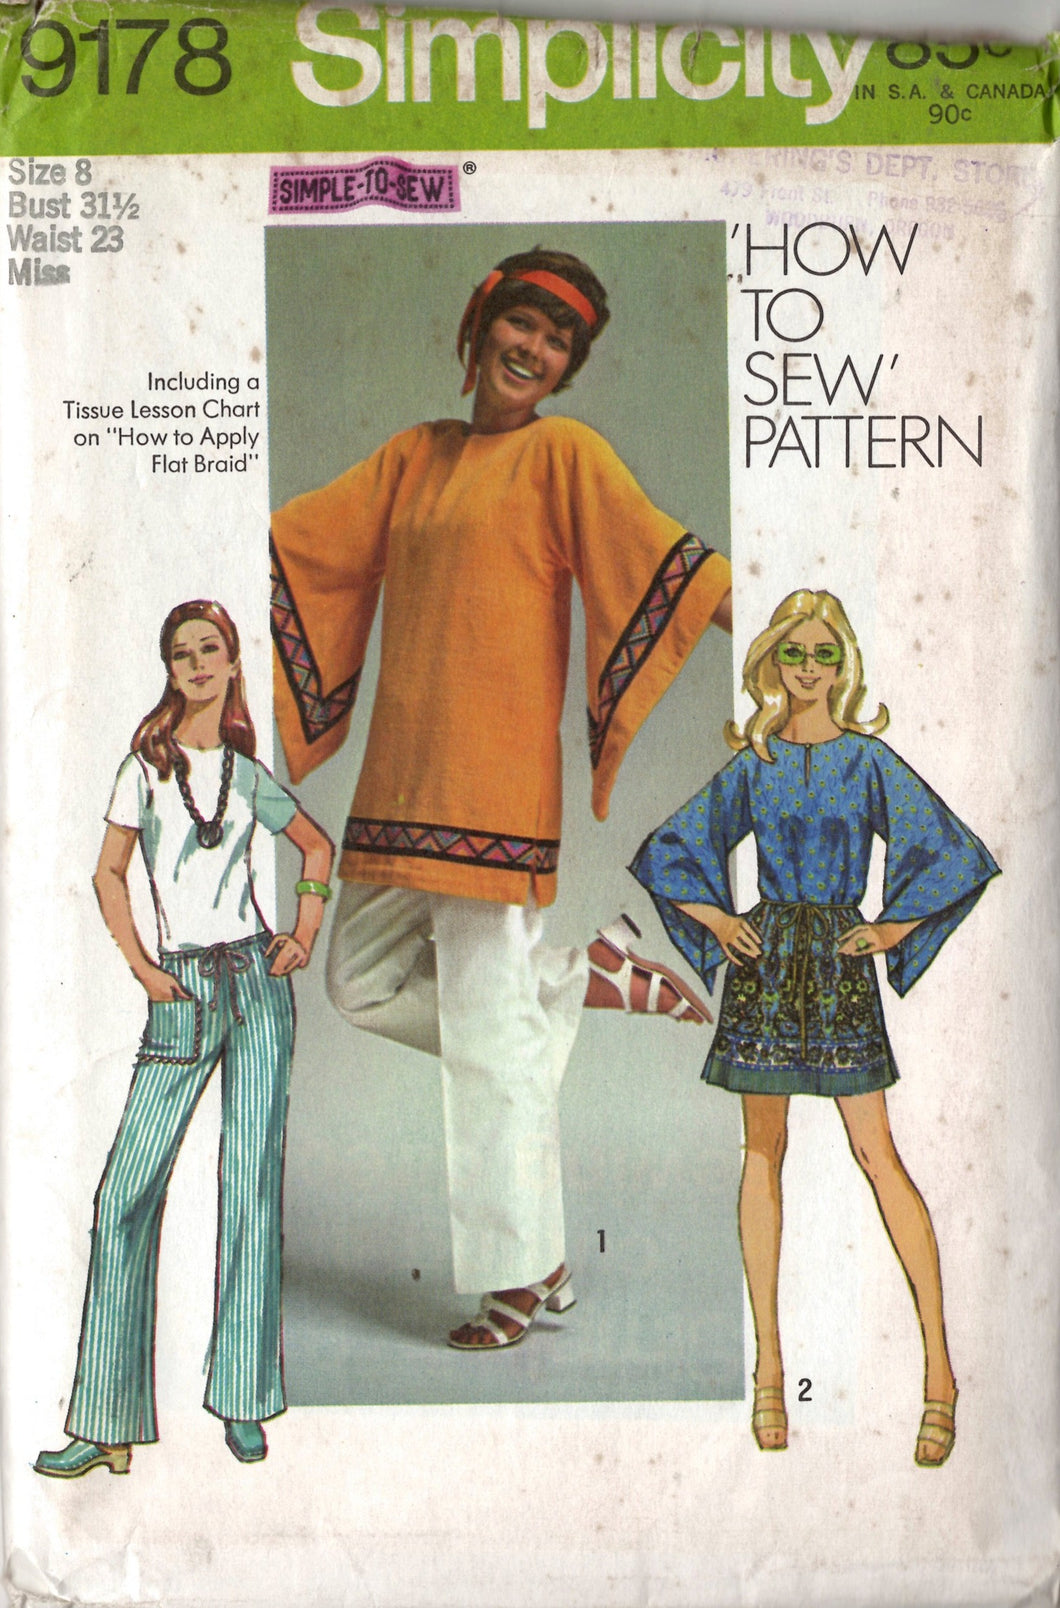 1970's Simplicity Tunic with large Bell Sleeves and Hip Hugger Pants Pattern - Bust 31.5